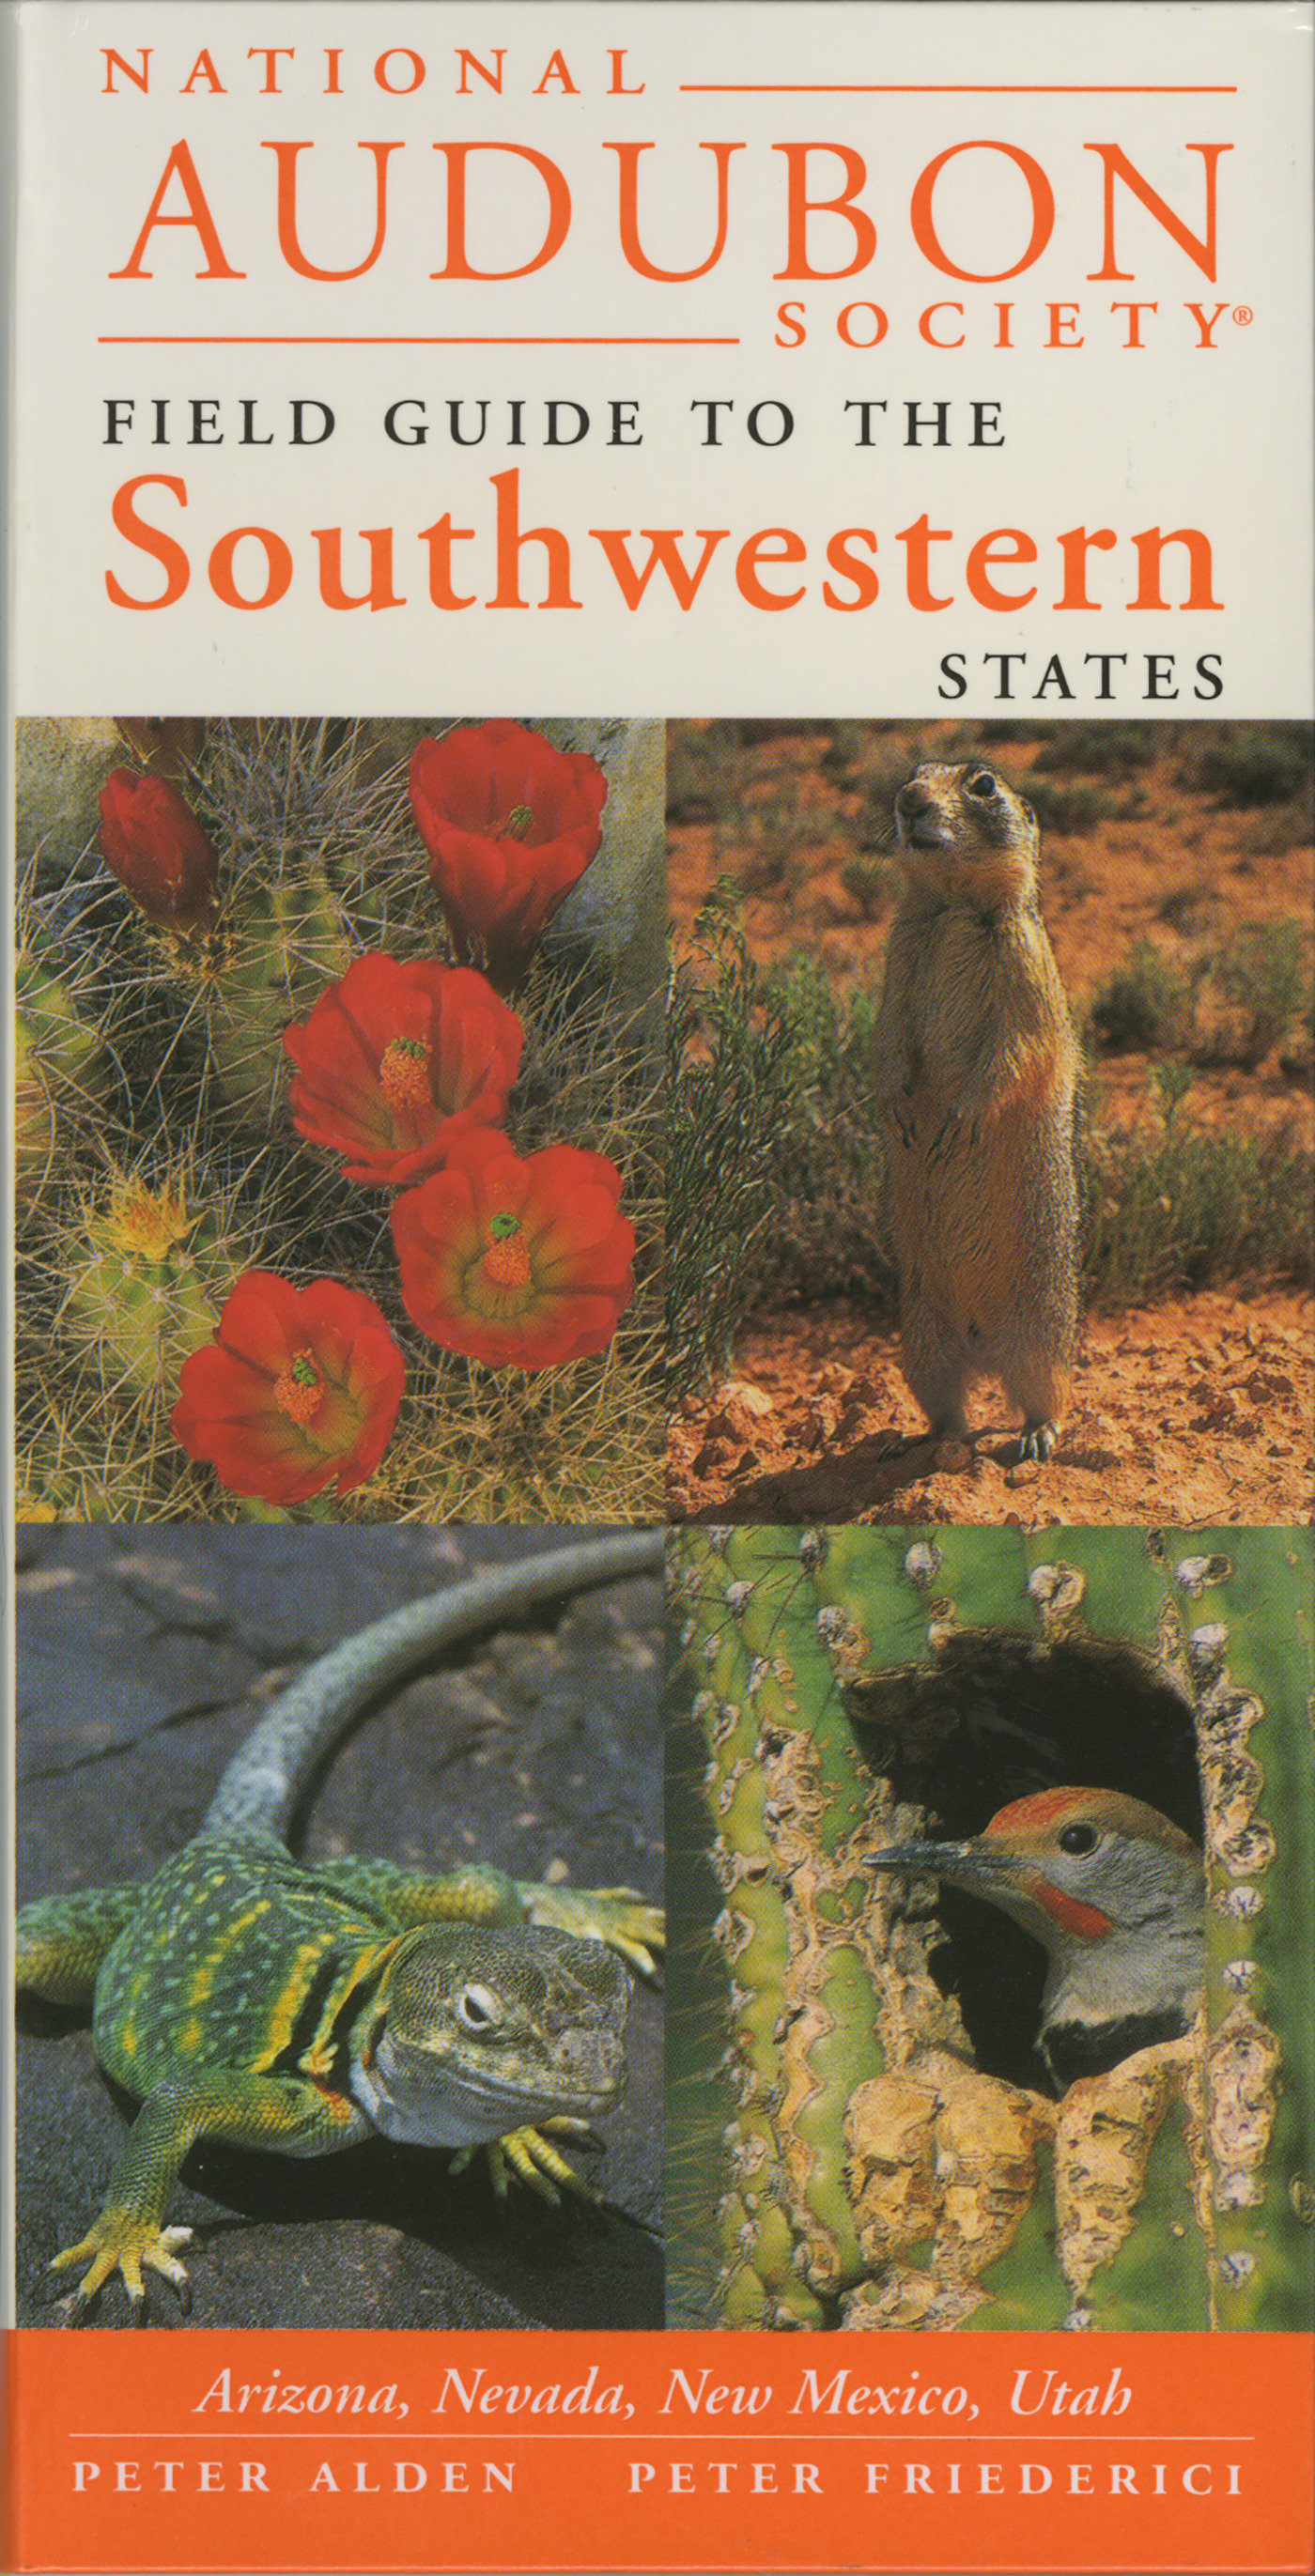 National Audubon Society Regional Guide To The Southwestern States (Hardcover Book)